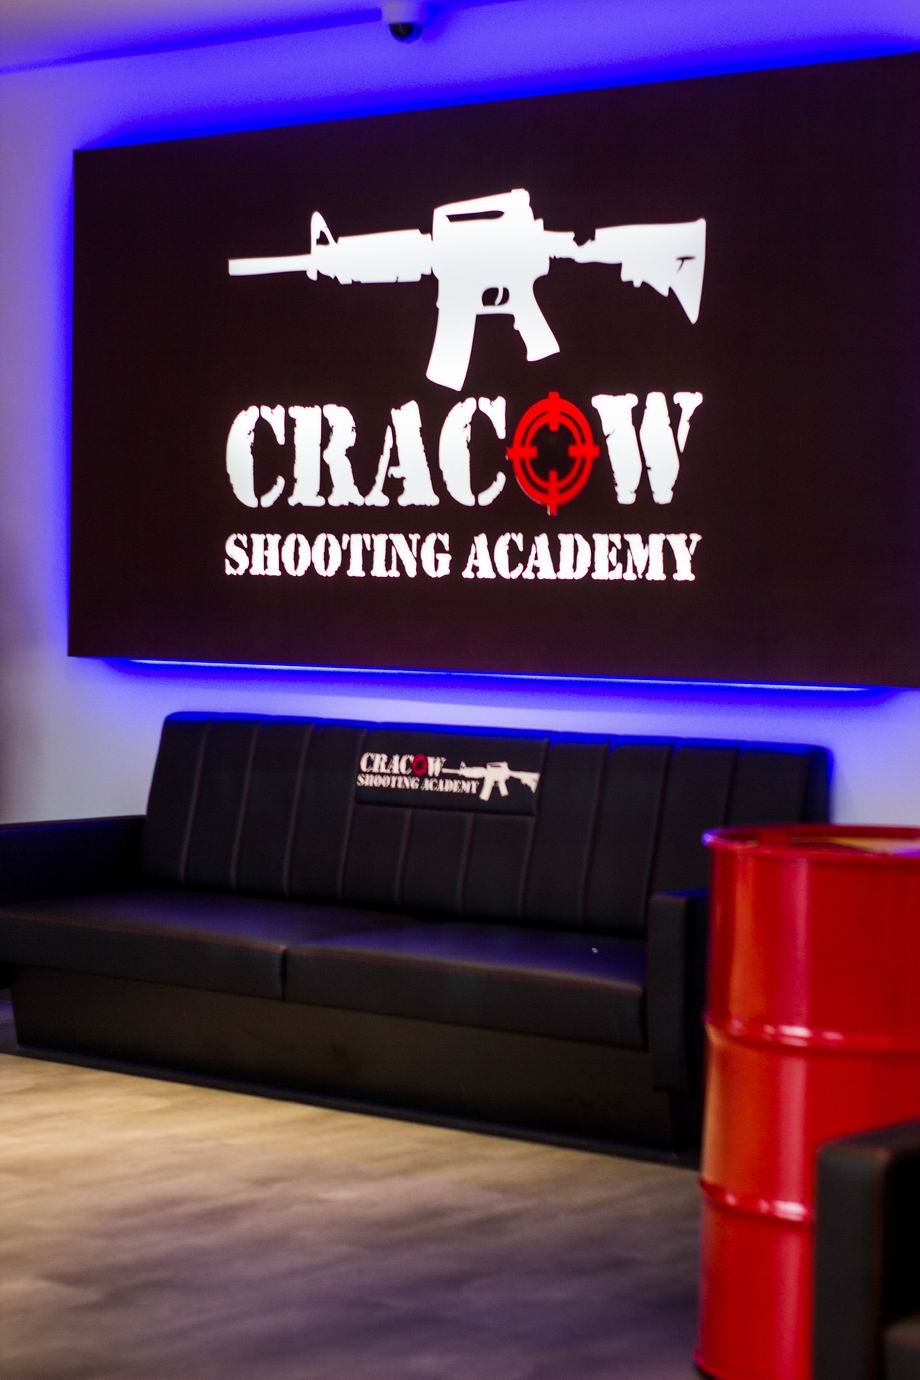 Cracow Shooting Academy